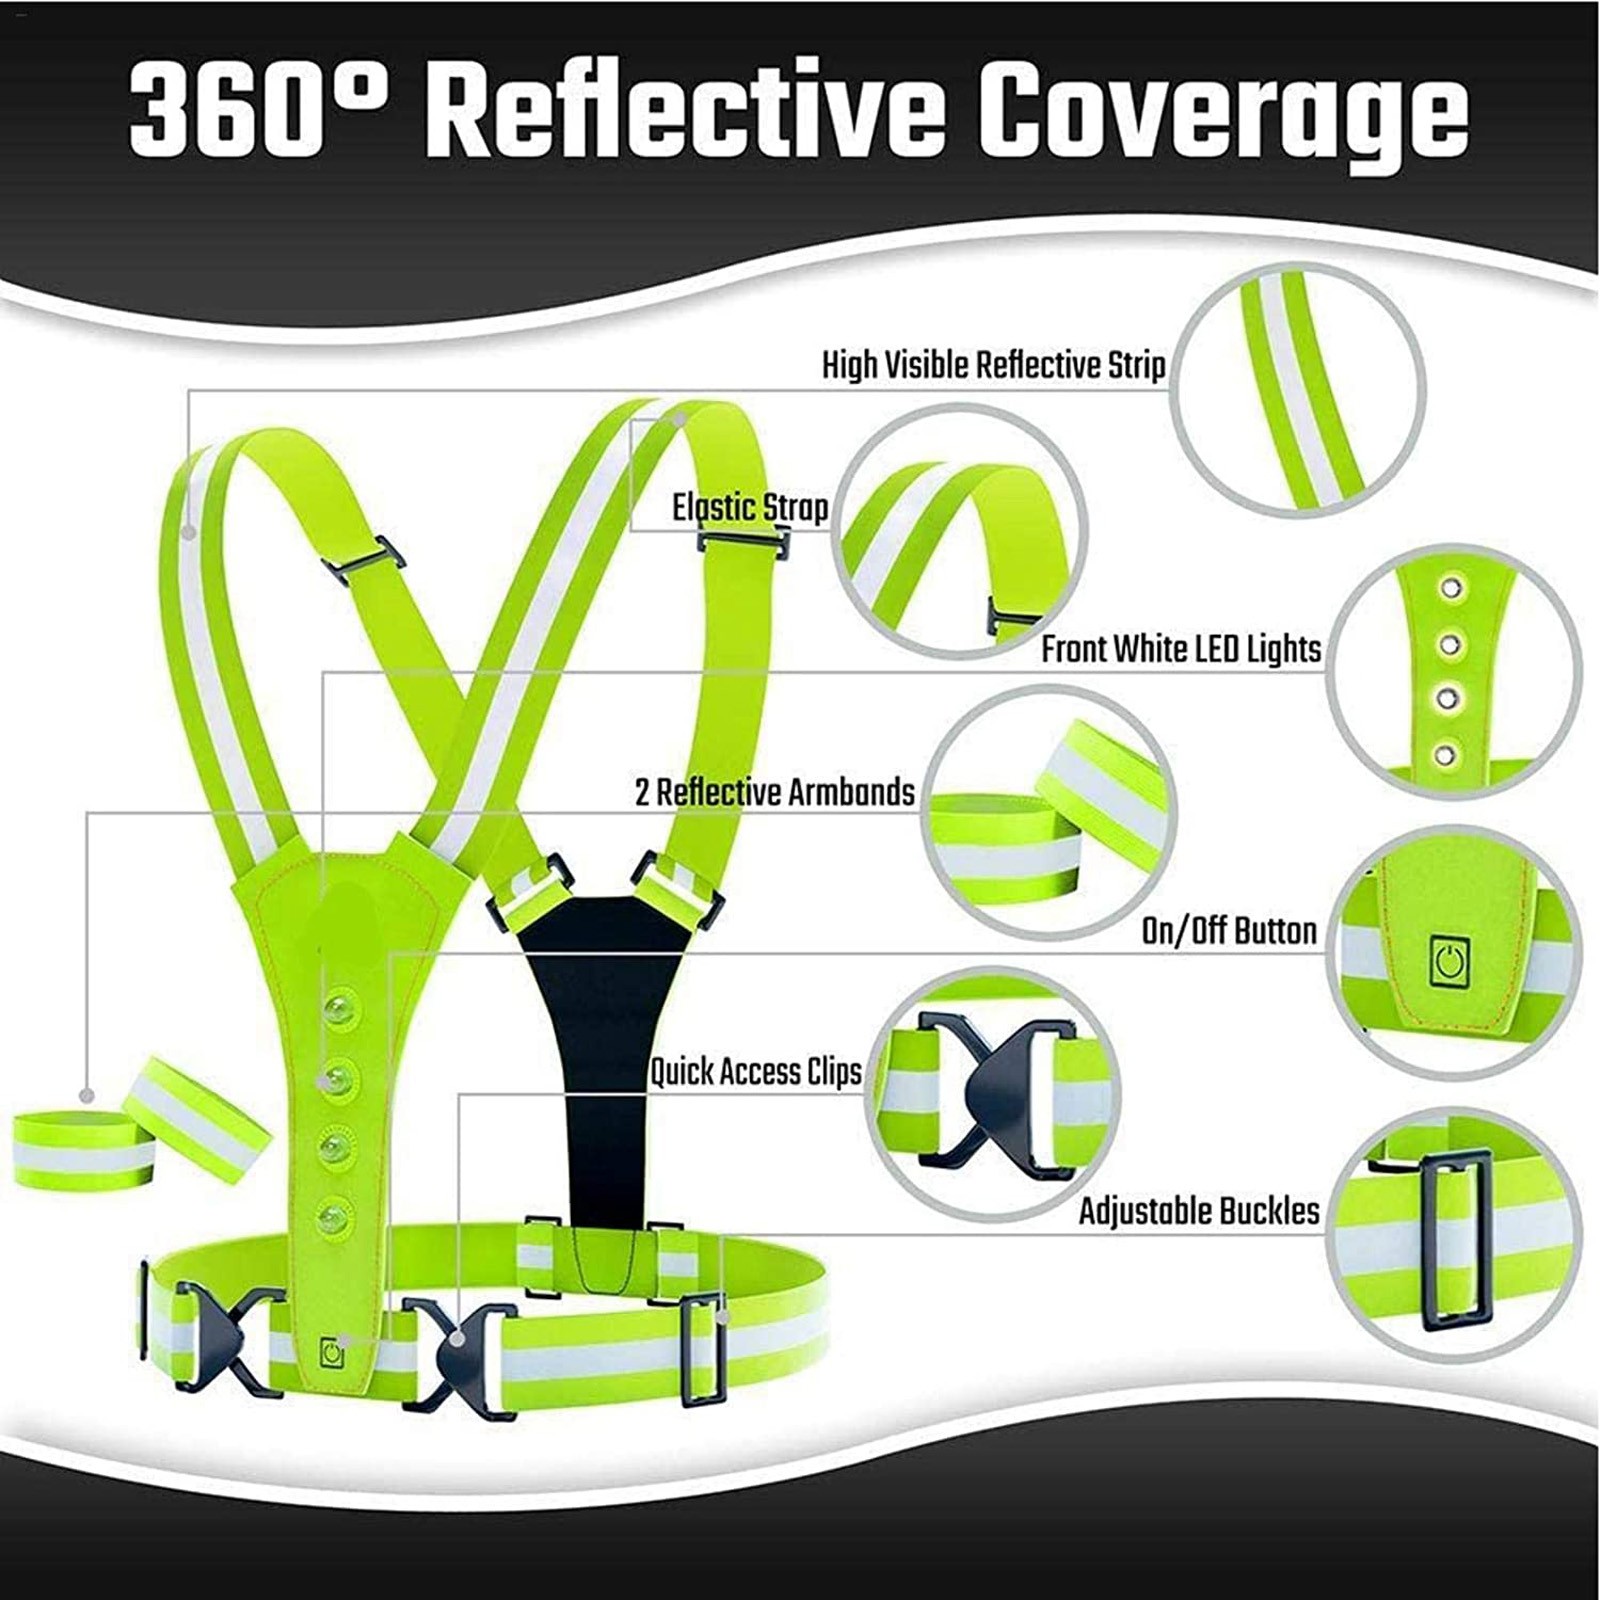 Reflective Safety Clothing réflective Vest Motorcycle Strap Elastic Webbing Night Running Riding Reflective Clothes Vest Unisex